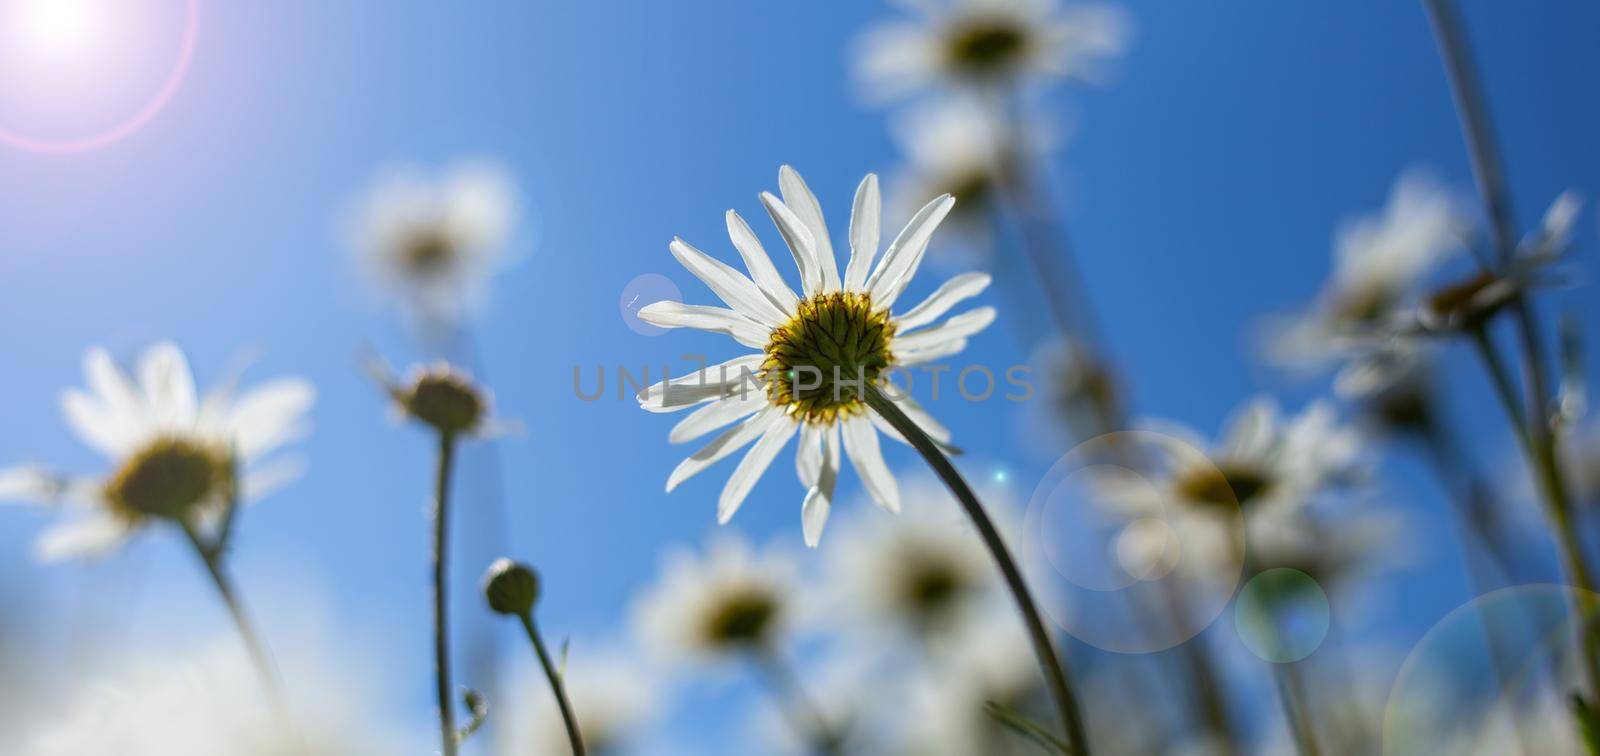 Spring summer flowers on blue sky background with sun. Sunny day, white daisies